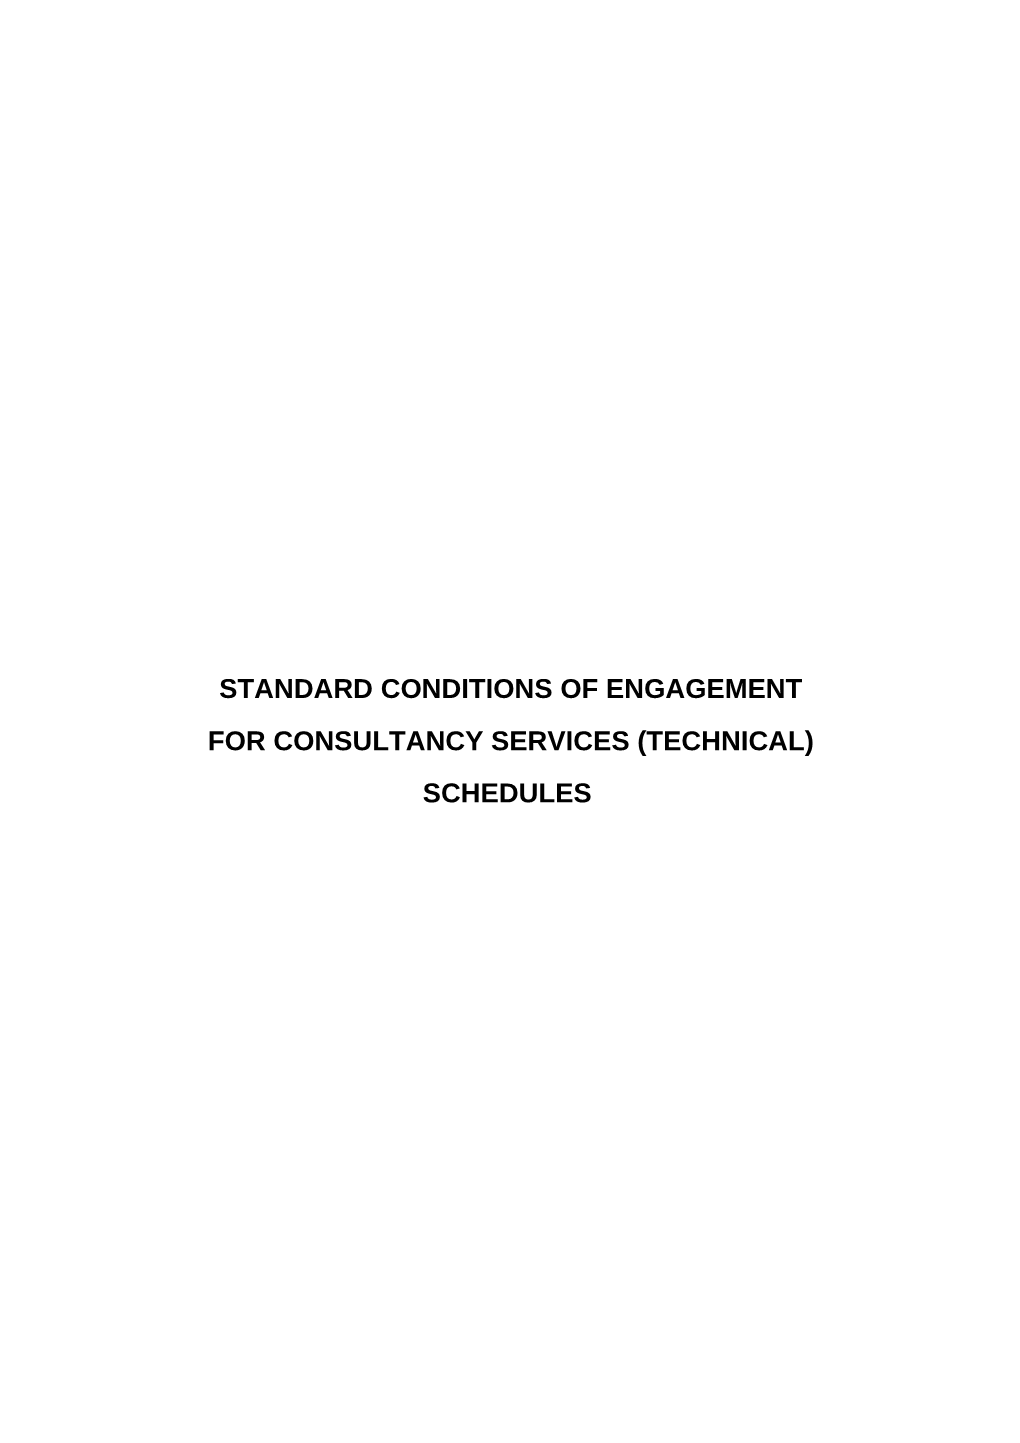 Standard Conditions of Engagement